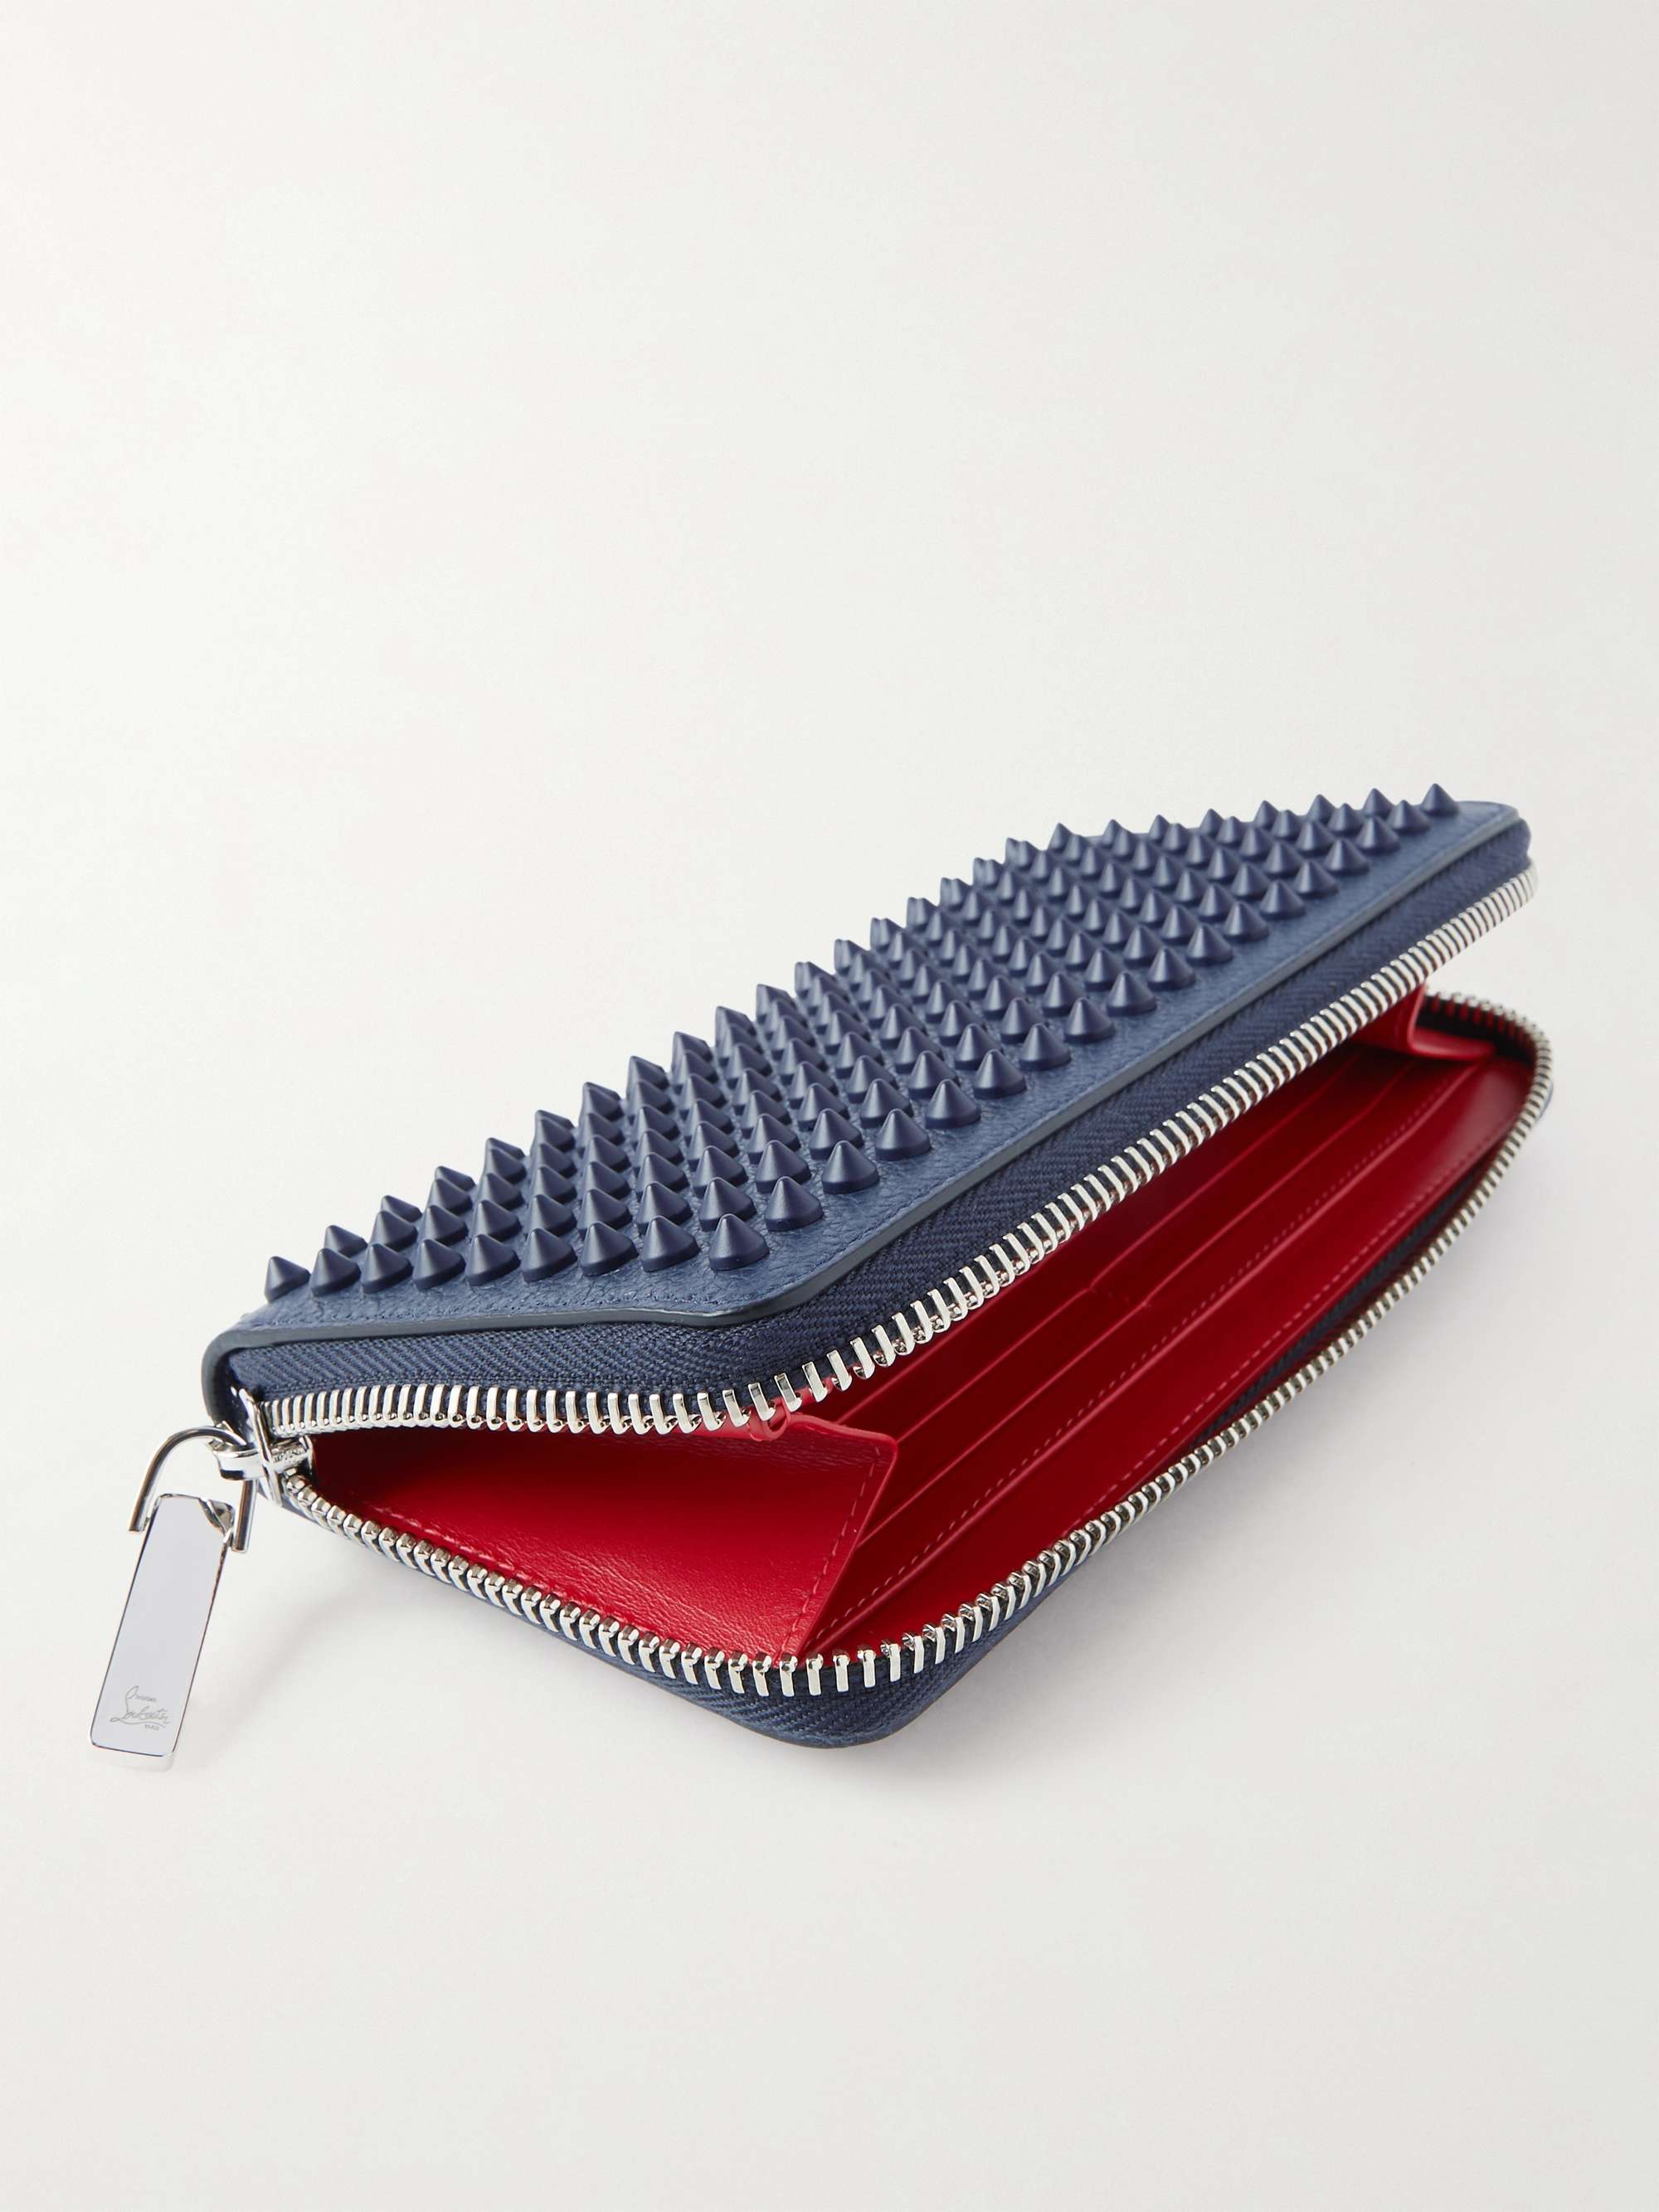 CHRISTIAN LOUBOUTIN Spiked Full-Grain Leather Zip-Around Wallet